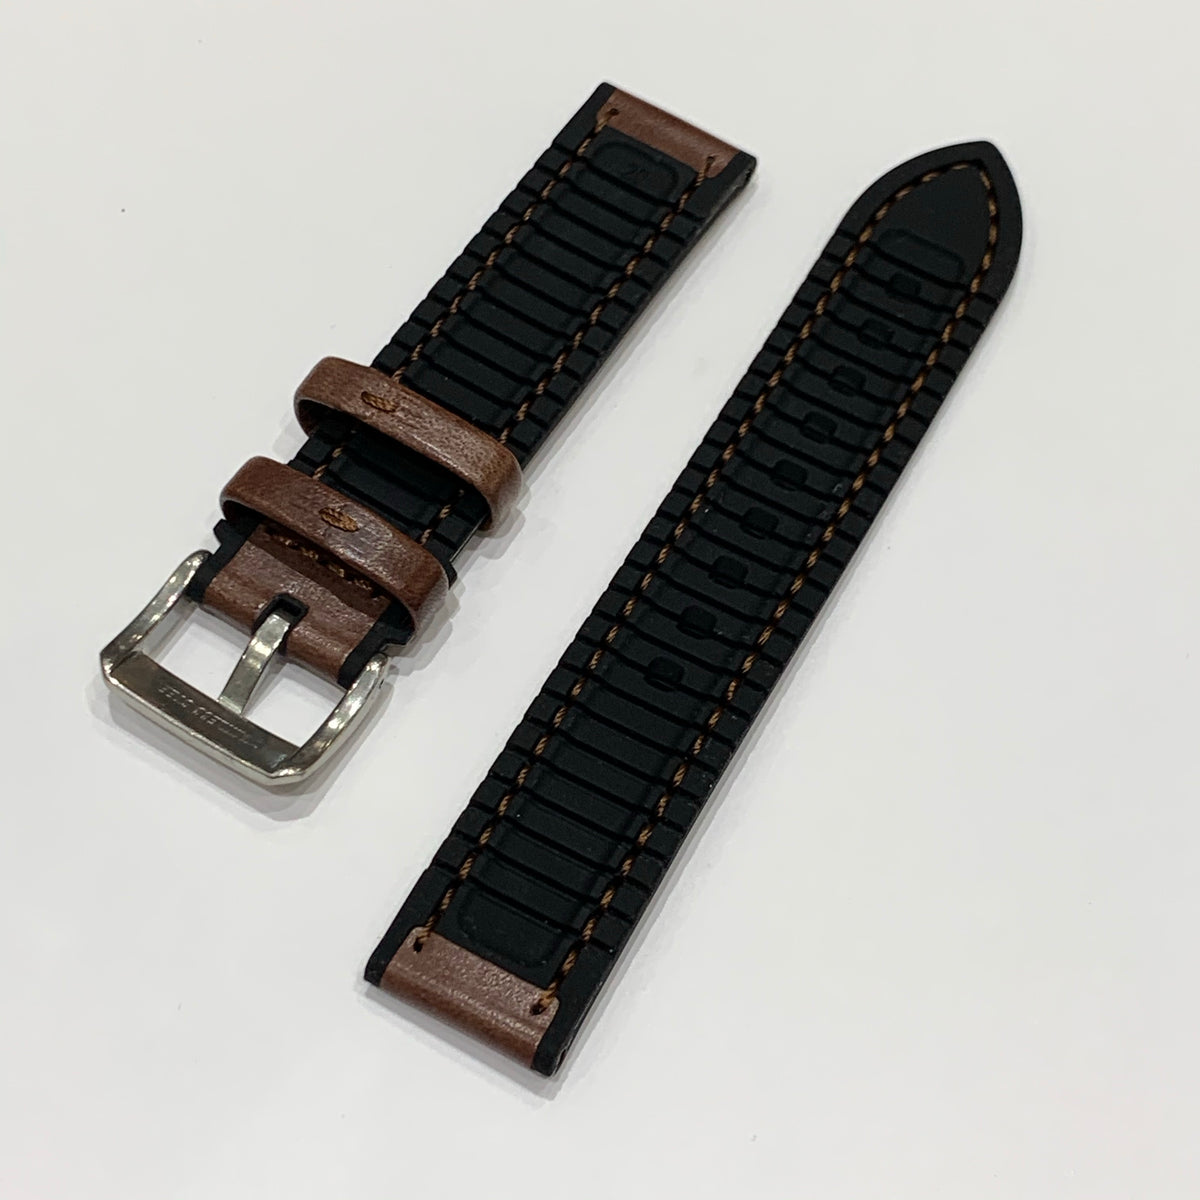 Alpine Watchstrap - Smooth Leather w. Silicone lining